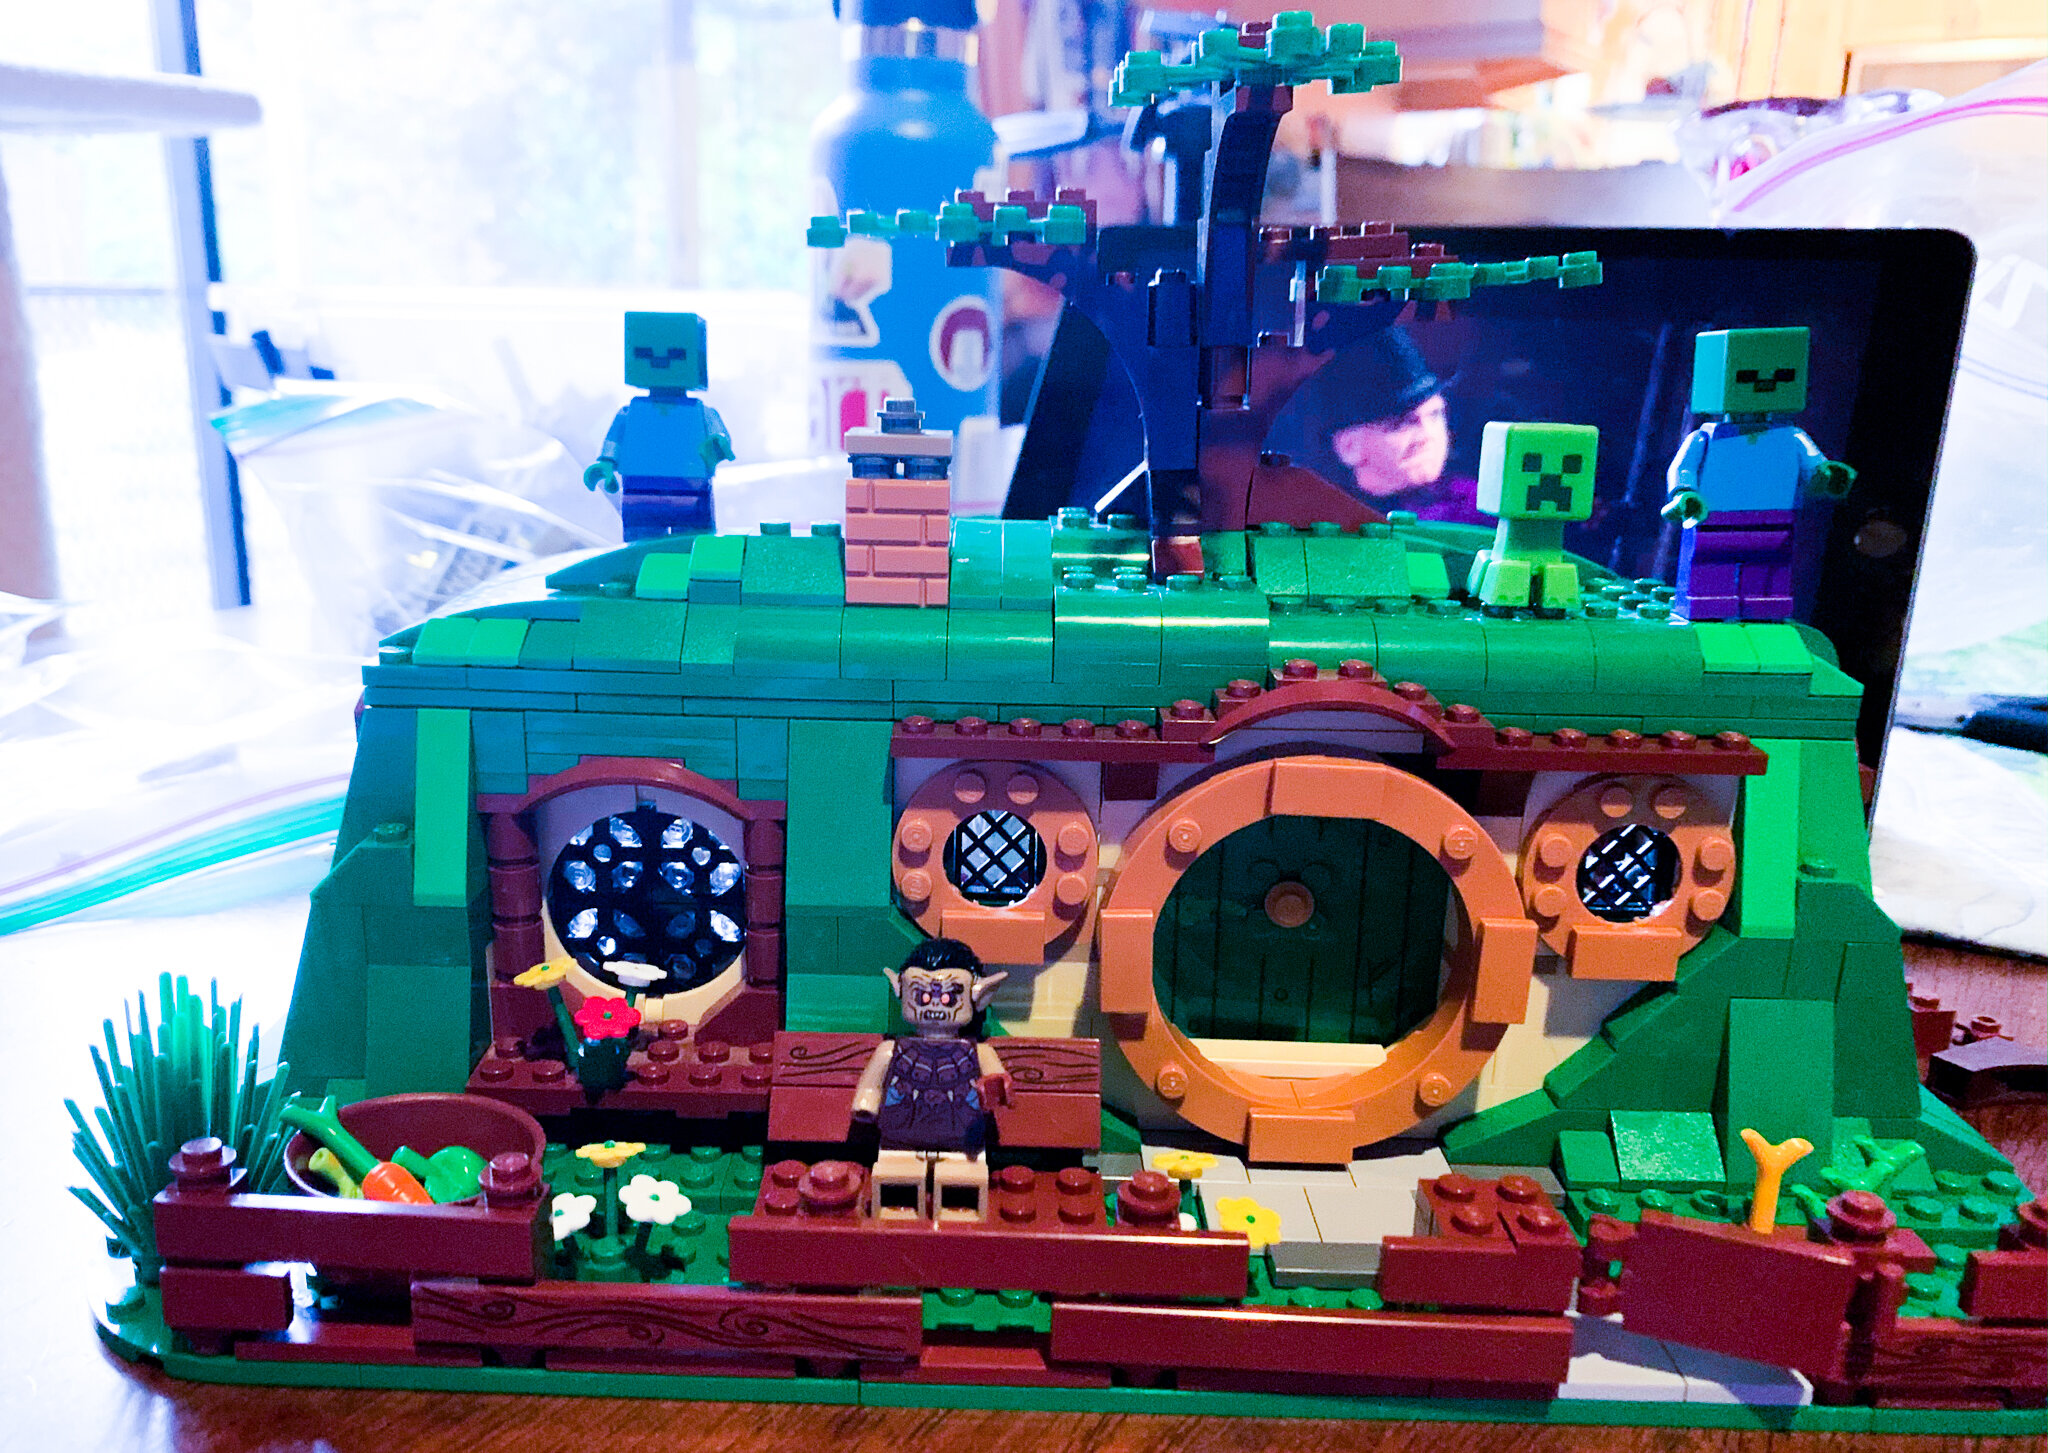 Bag End Lego Built by Anika Vodicka | Staying at Home Day 16 by Lenka Vodicka